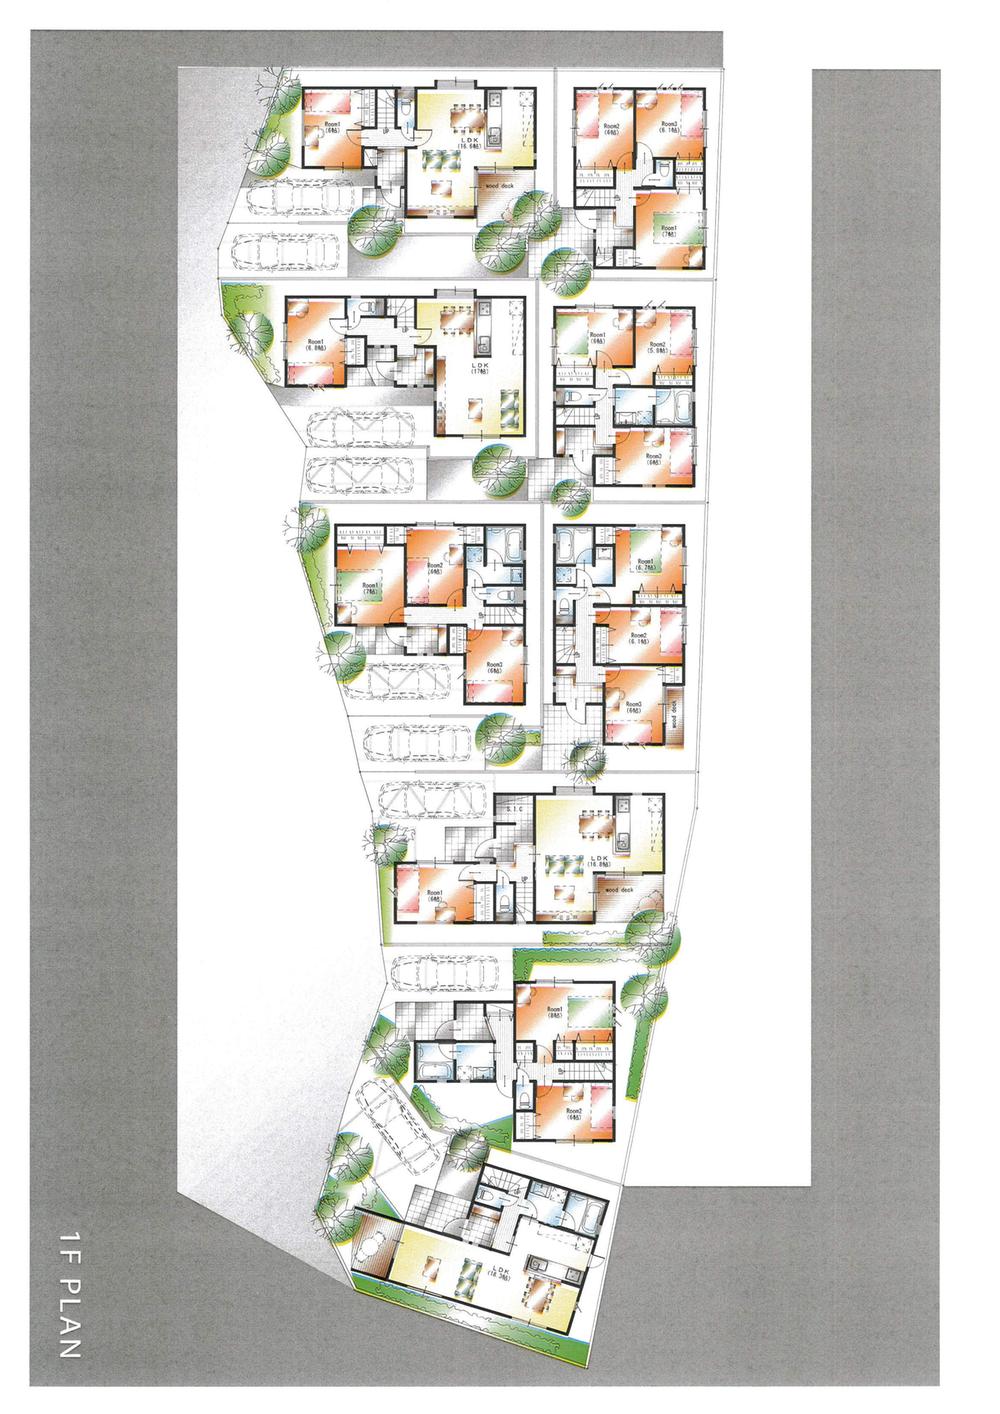 Other building plan example. Building plan example ( Issue land) Building Price      Ten thousand yen, Building area    sq m